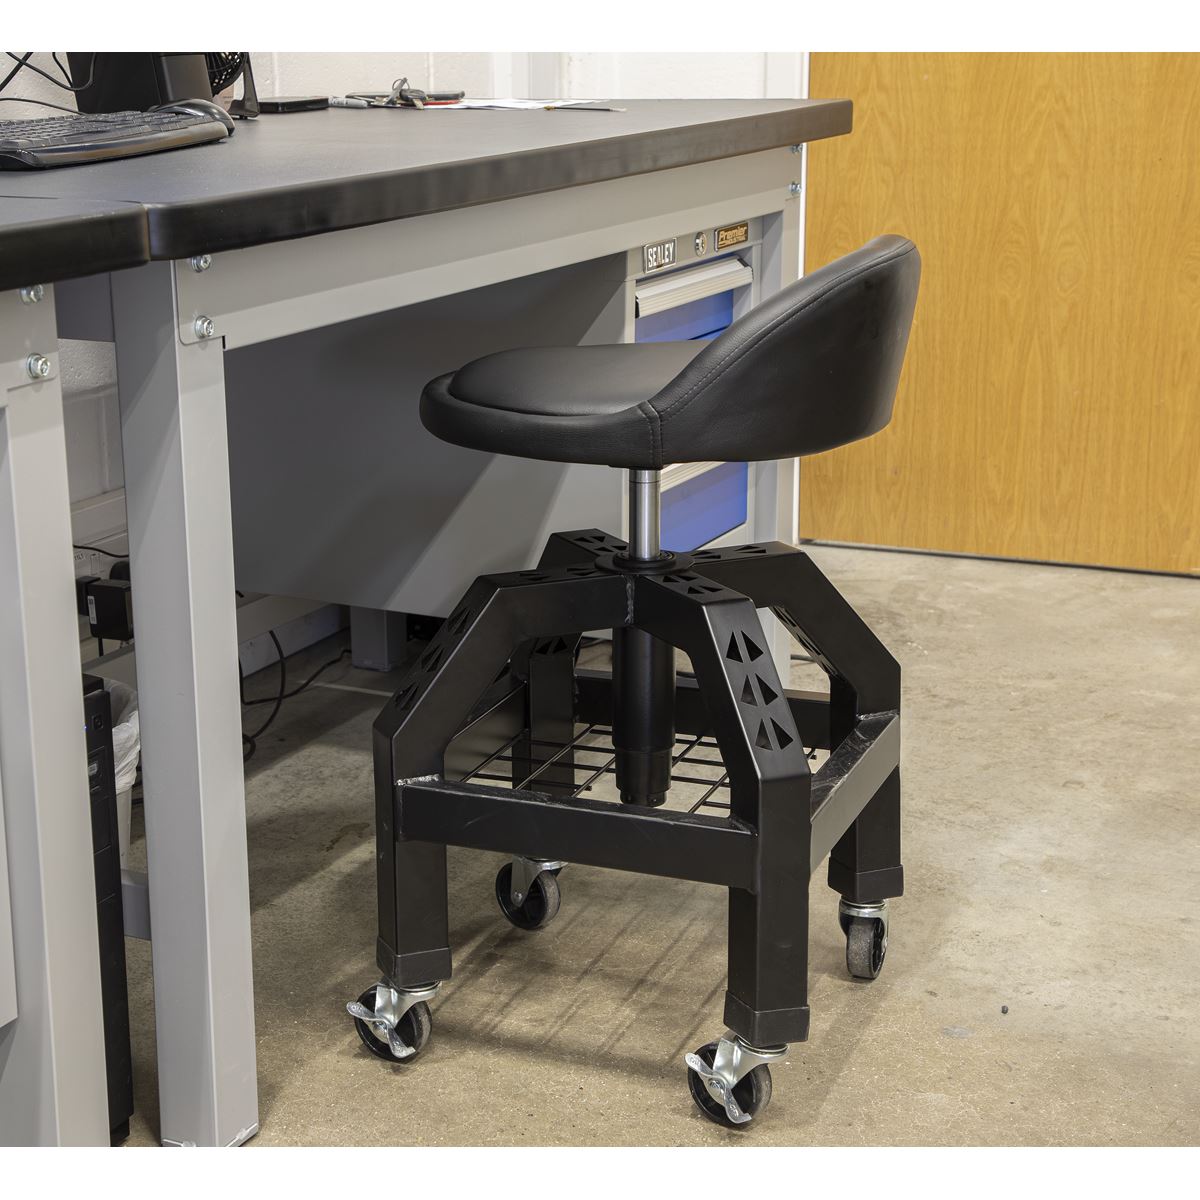 Sealey Premier Industrial Premier Industrial Pneumatic Creeper Stool with Adjustable Height Swivel Seat & Back Rest